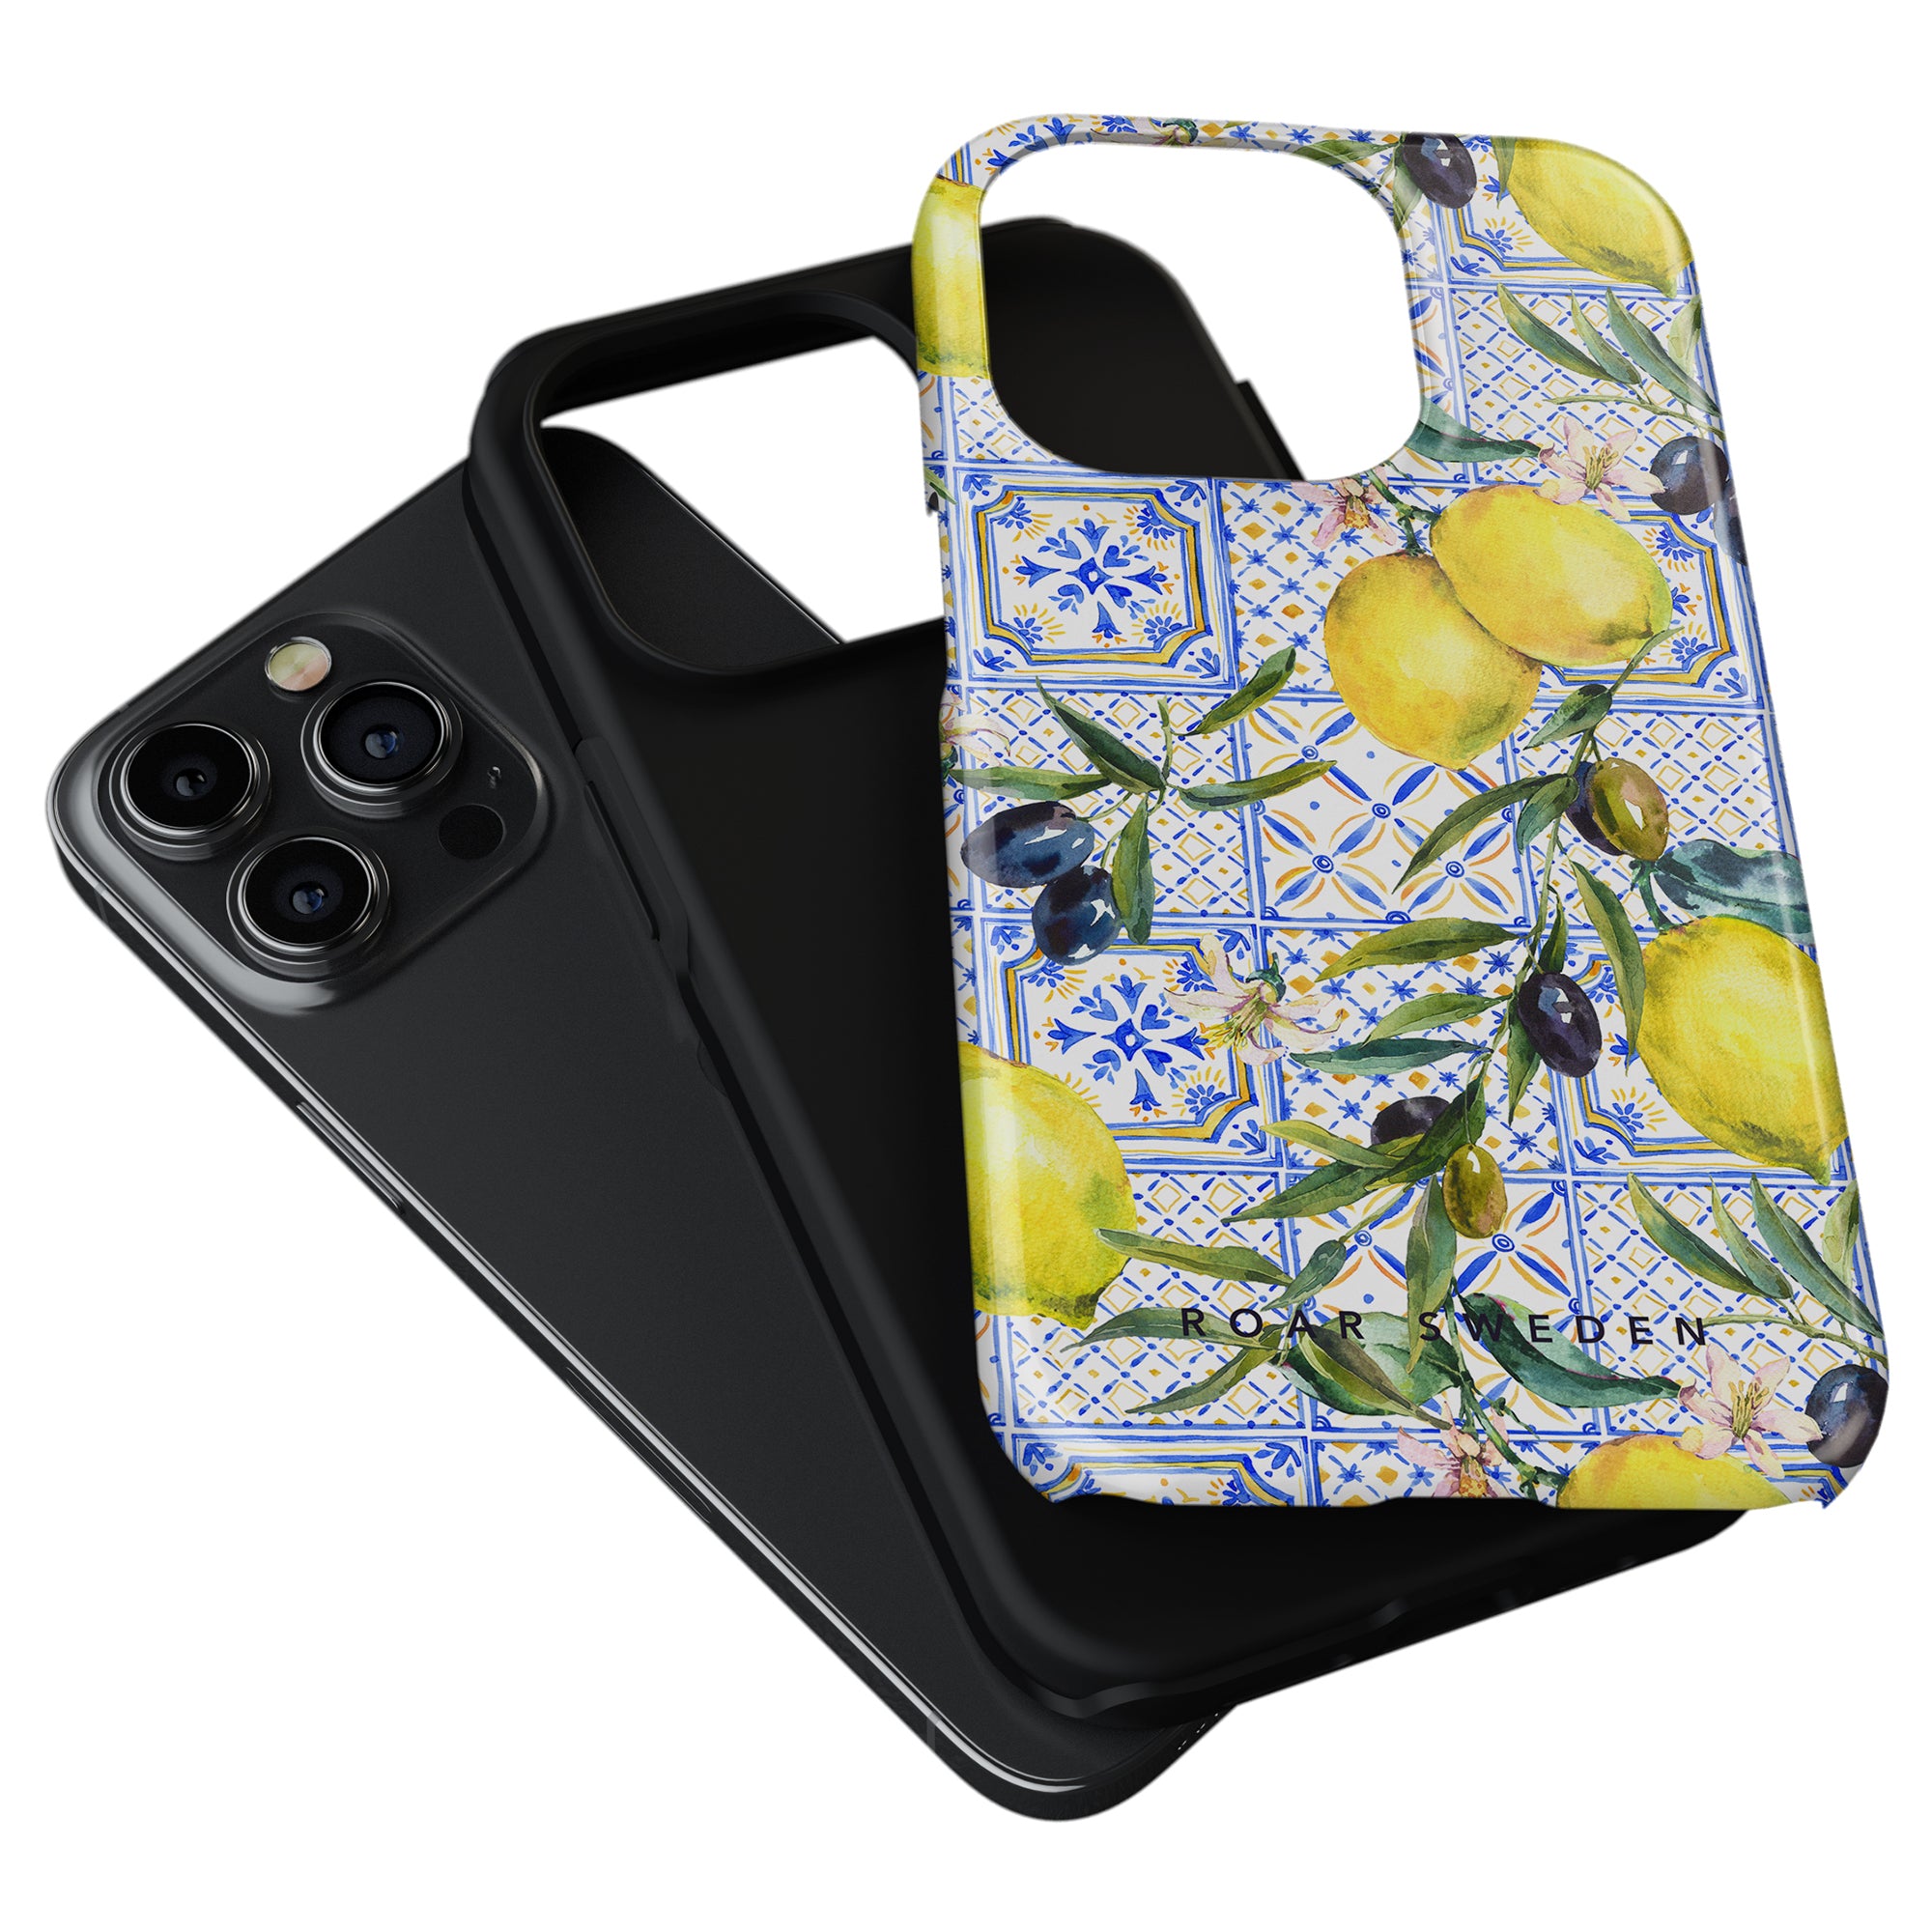 Two Amalfi - Tough Cases with different designs, one plain black and the other with a lemon and tile print, on a white background.